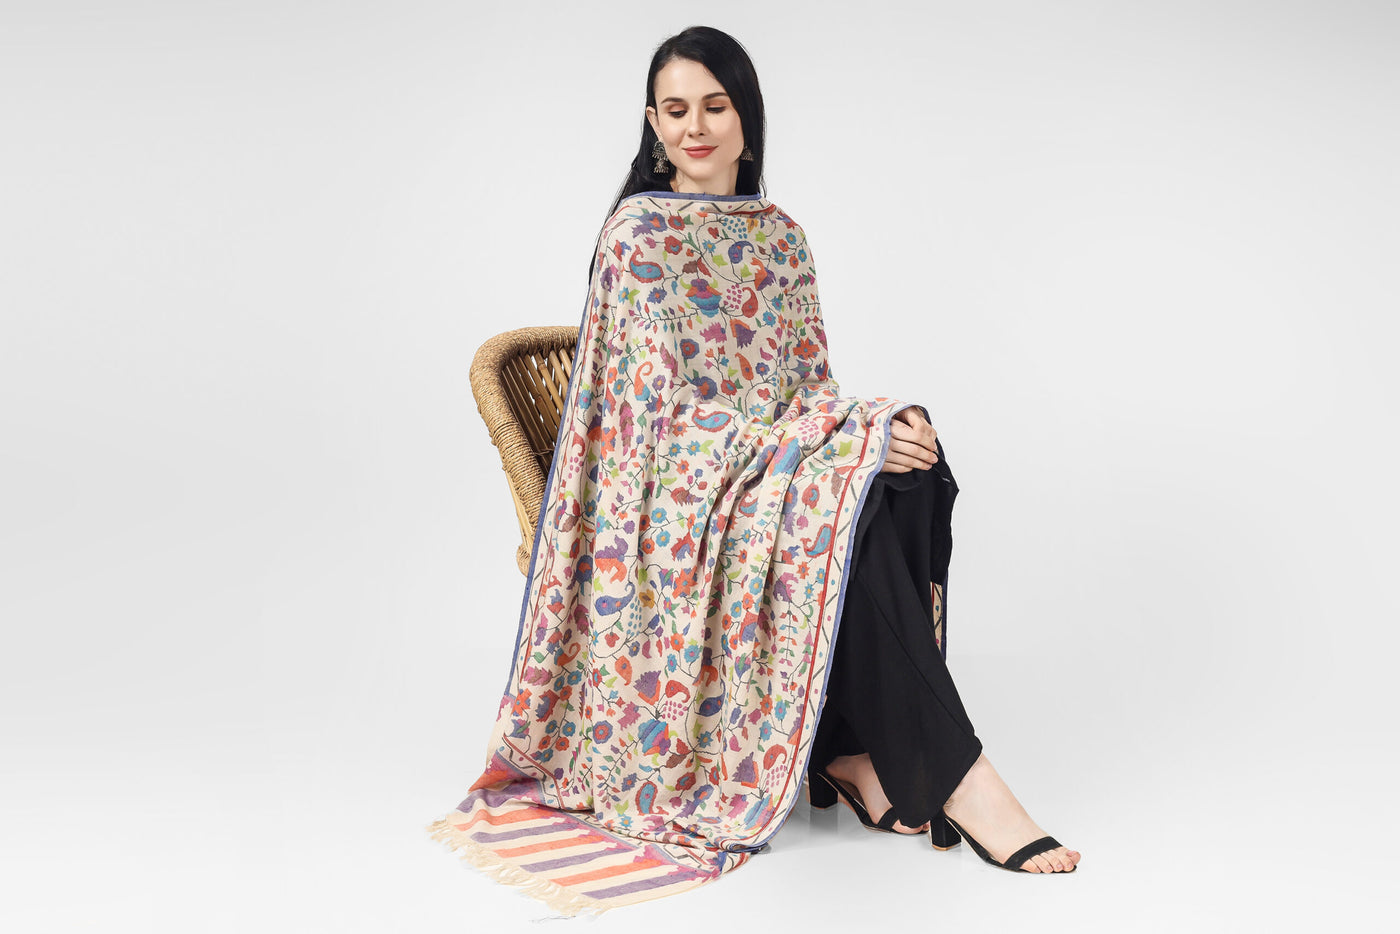 "KANI SHAWL - White  kani Pashmina Shawl, and the fact that it was made by skilled artisans online available at - ITALY - SPAIN - SWITZERLAND - SOUTH AFRICA - NEW ZEALAND - SINGAPORE - MALAYSIA ."